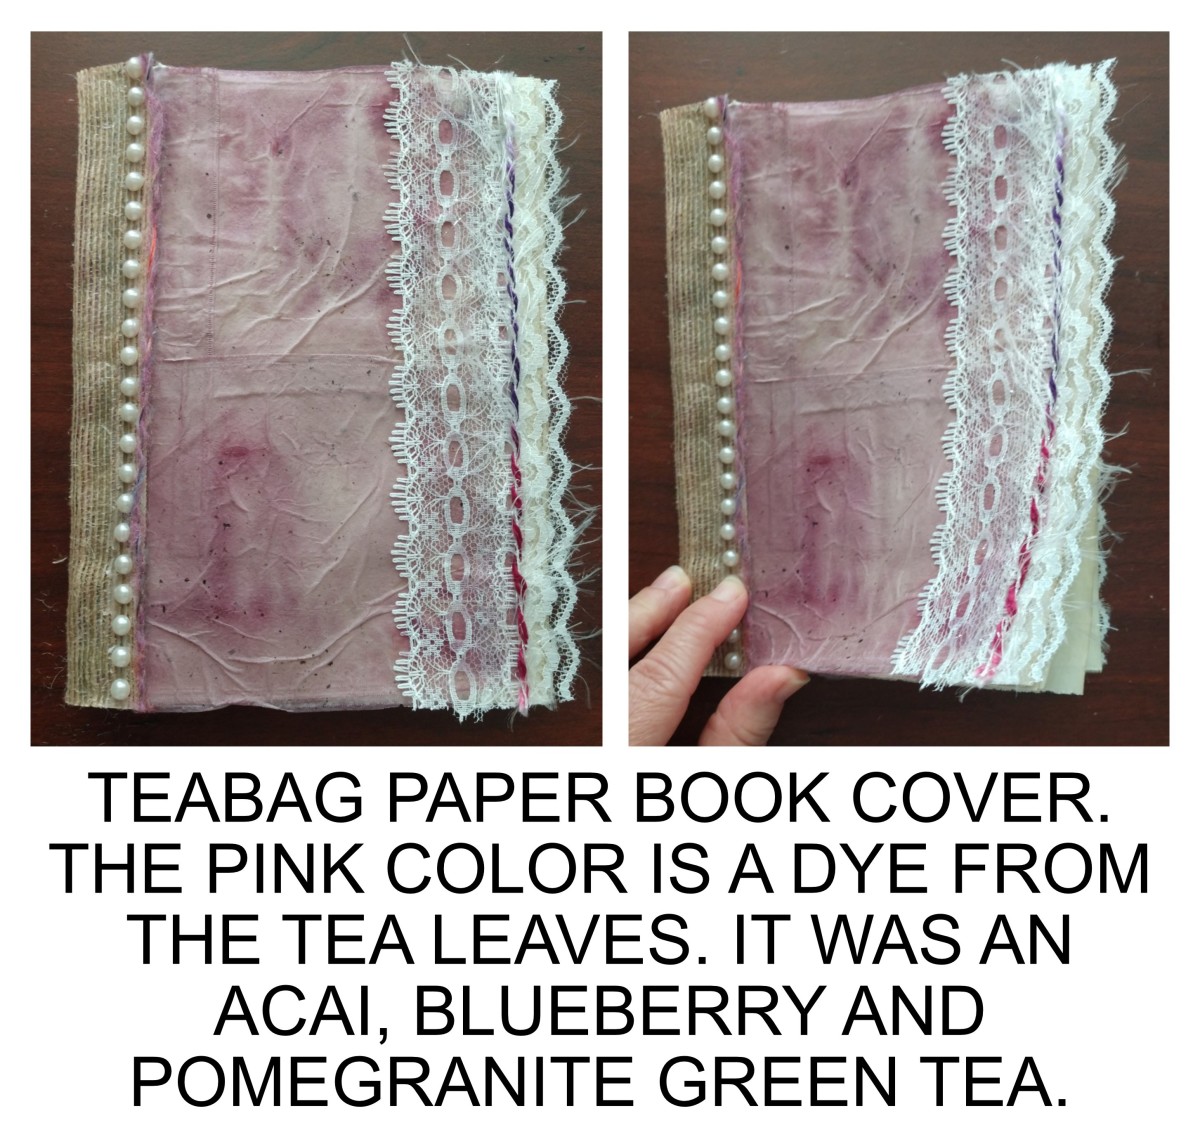 Berry stained teabag paper journal cover